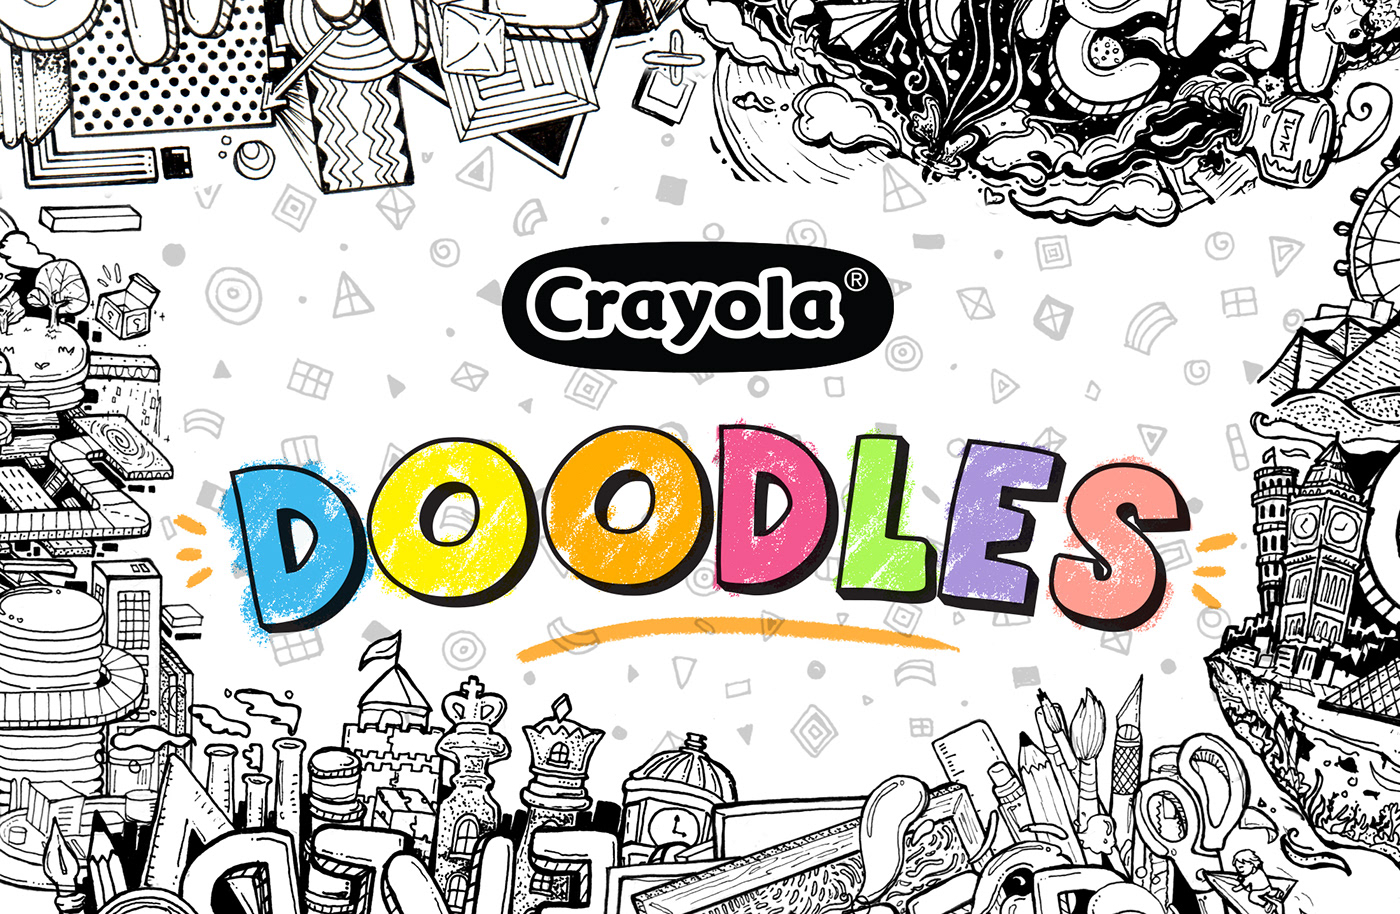 Crayola doodles black and white ILLUSTRATION  typography   notebook stradmore notes